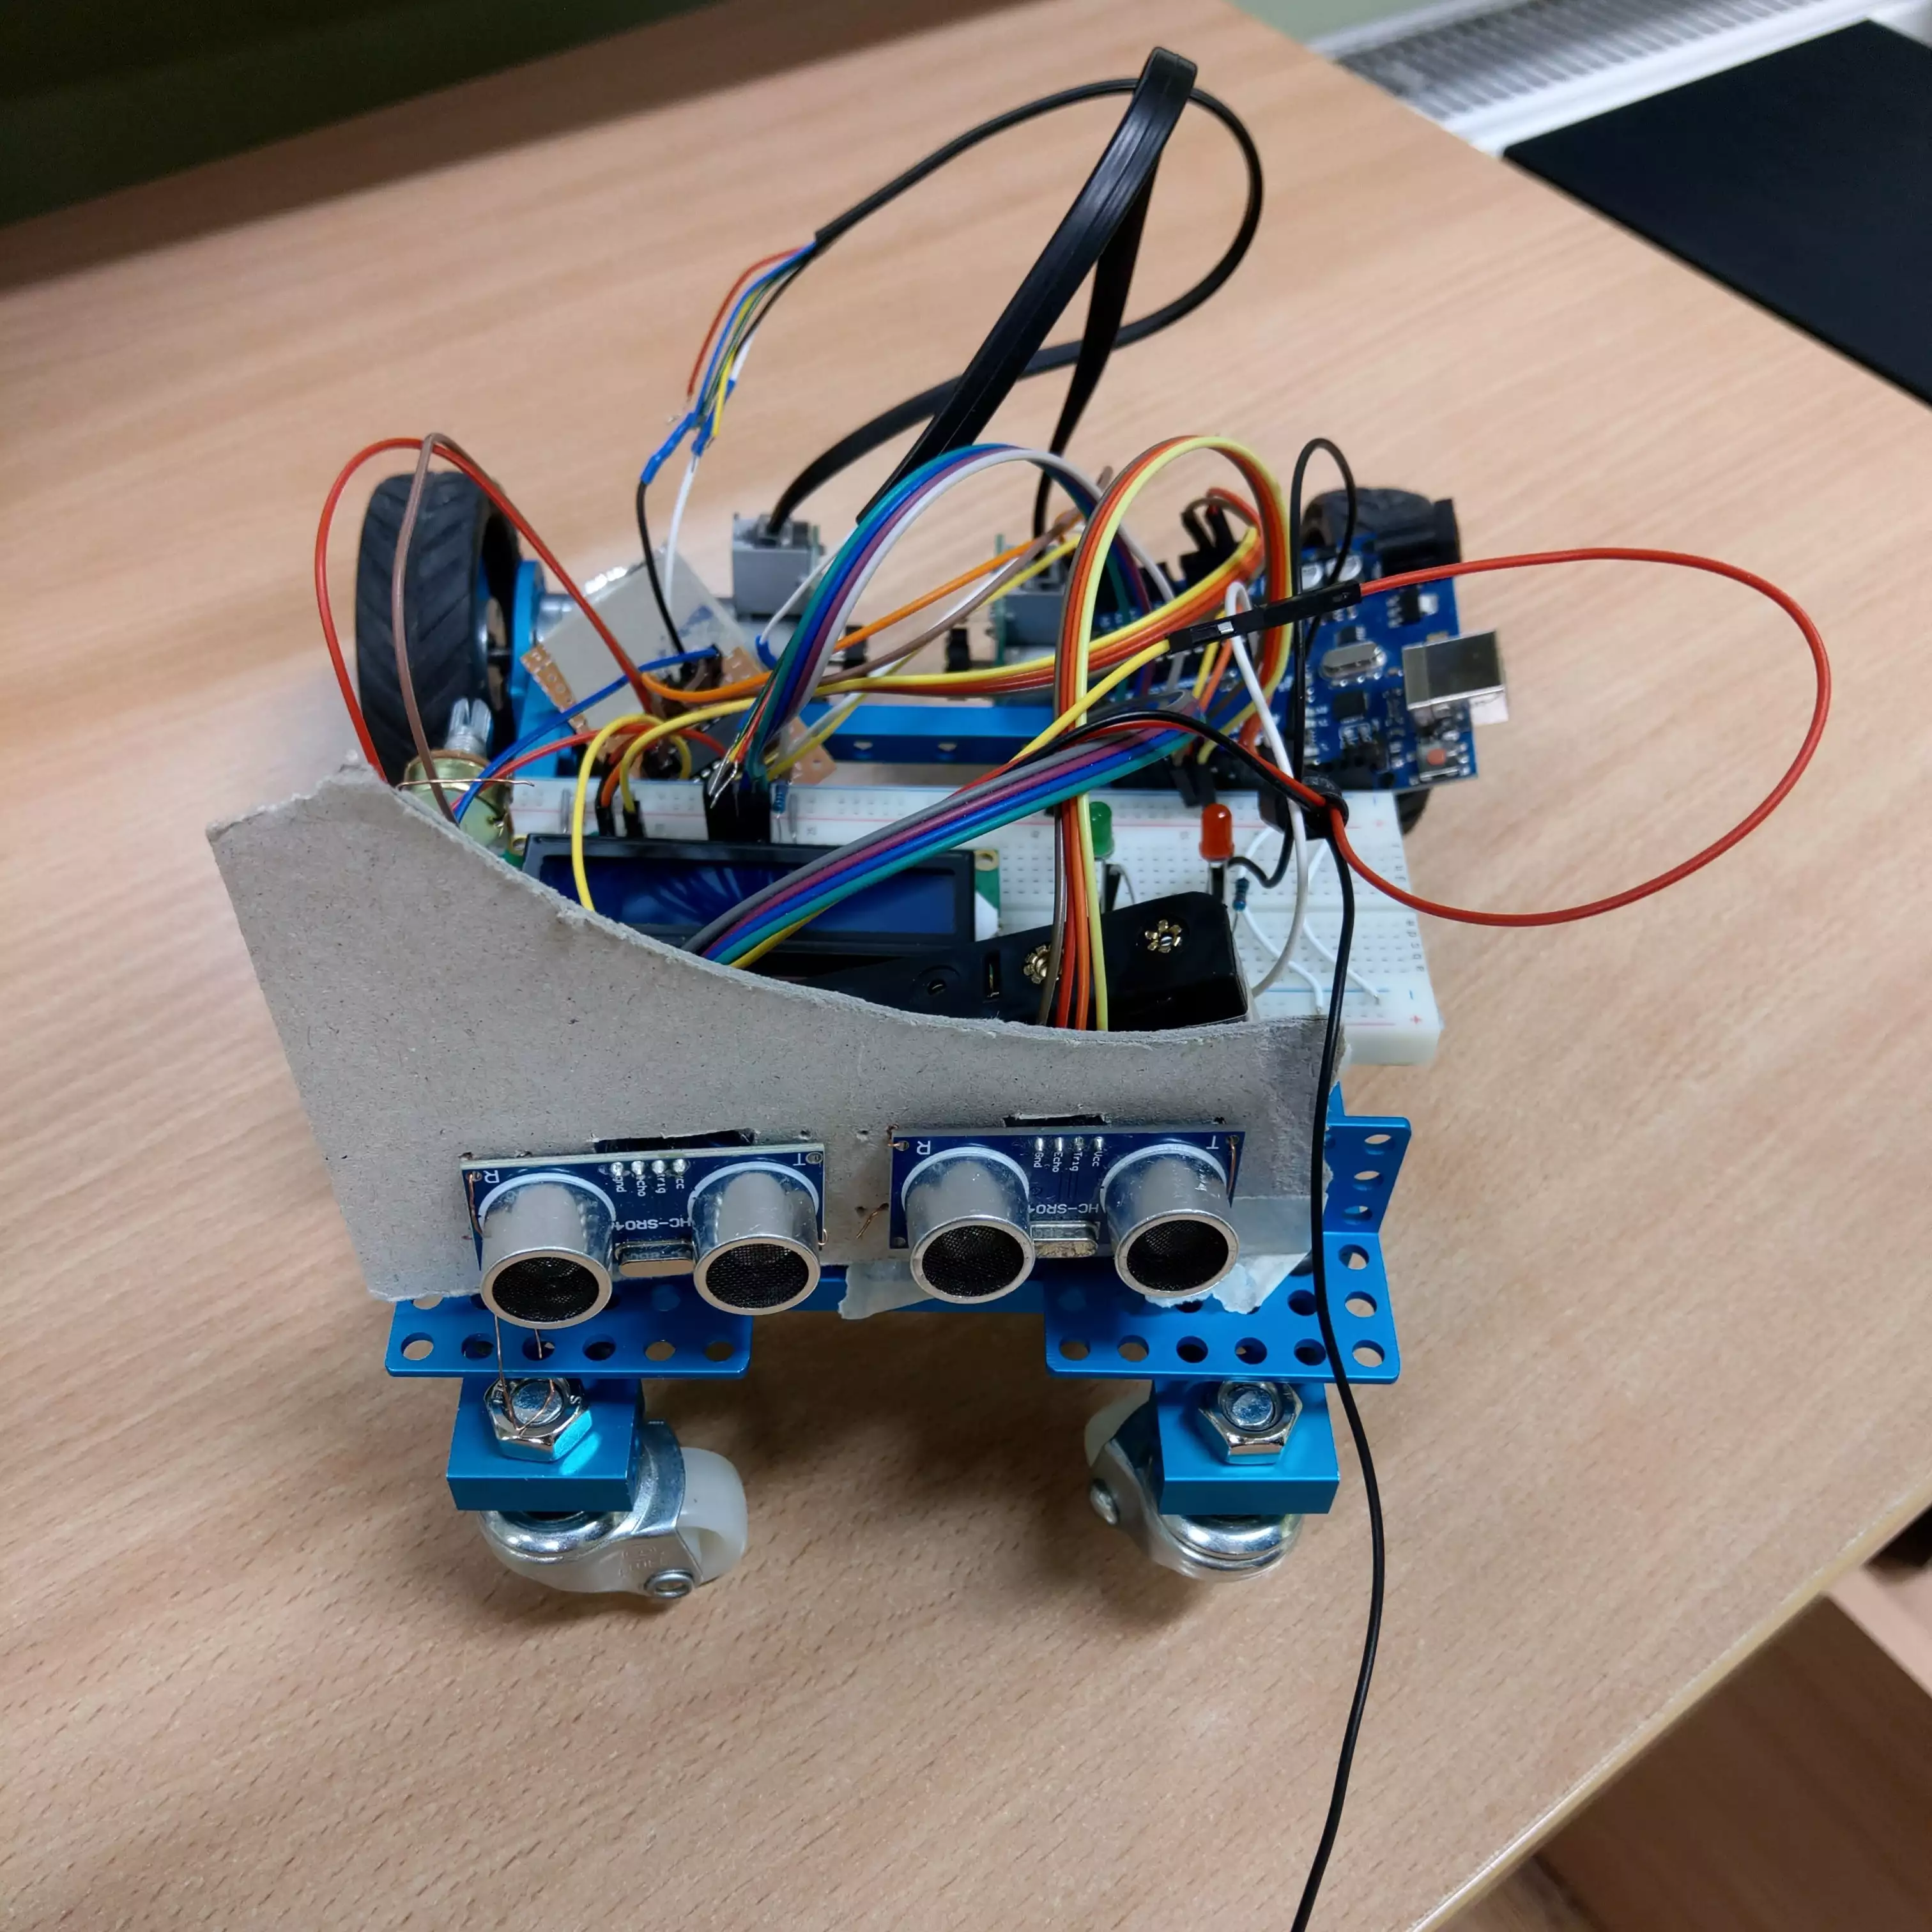 Proof-of-concept robot with two tyres and two nylon wheels (looking like furniture castors), one breadboard, LCD 16x2 screen, Arduino Uno with simply soldered H-bridge and two HC-SR04 sensors at front